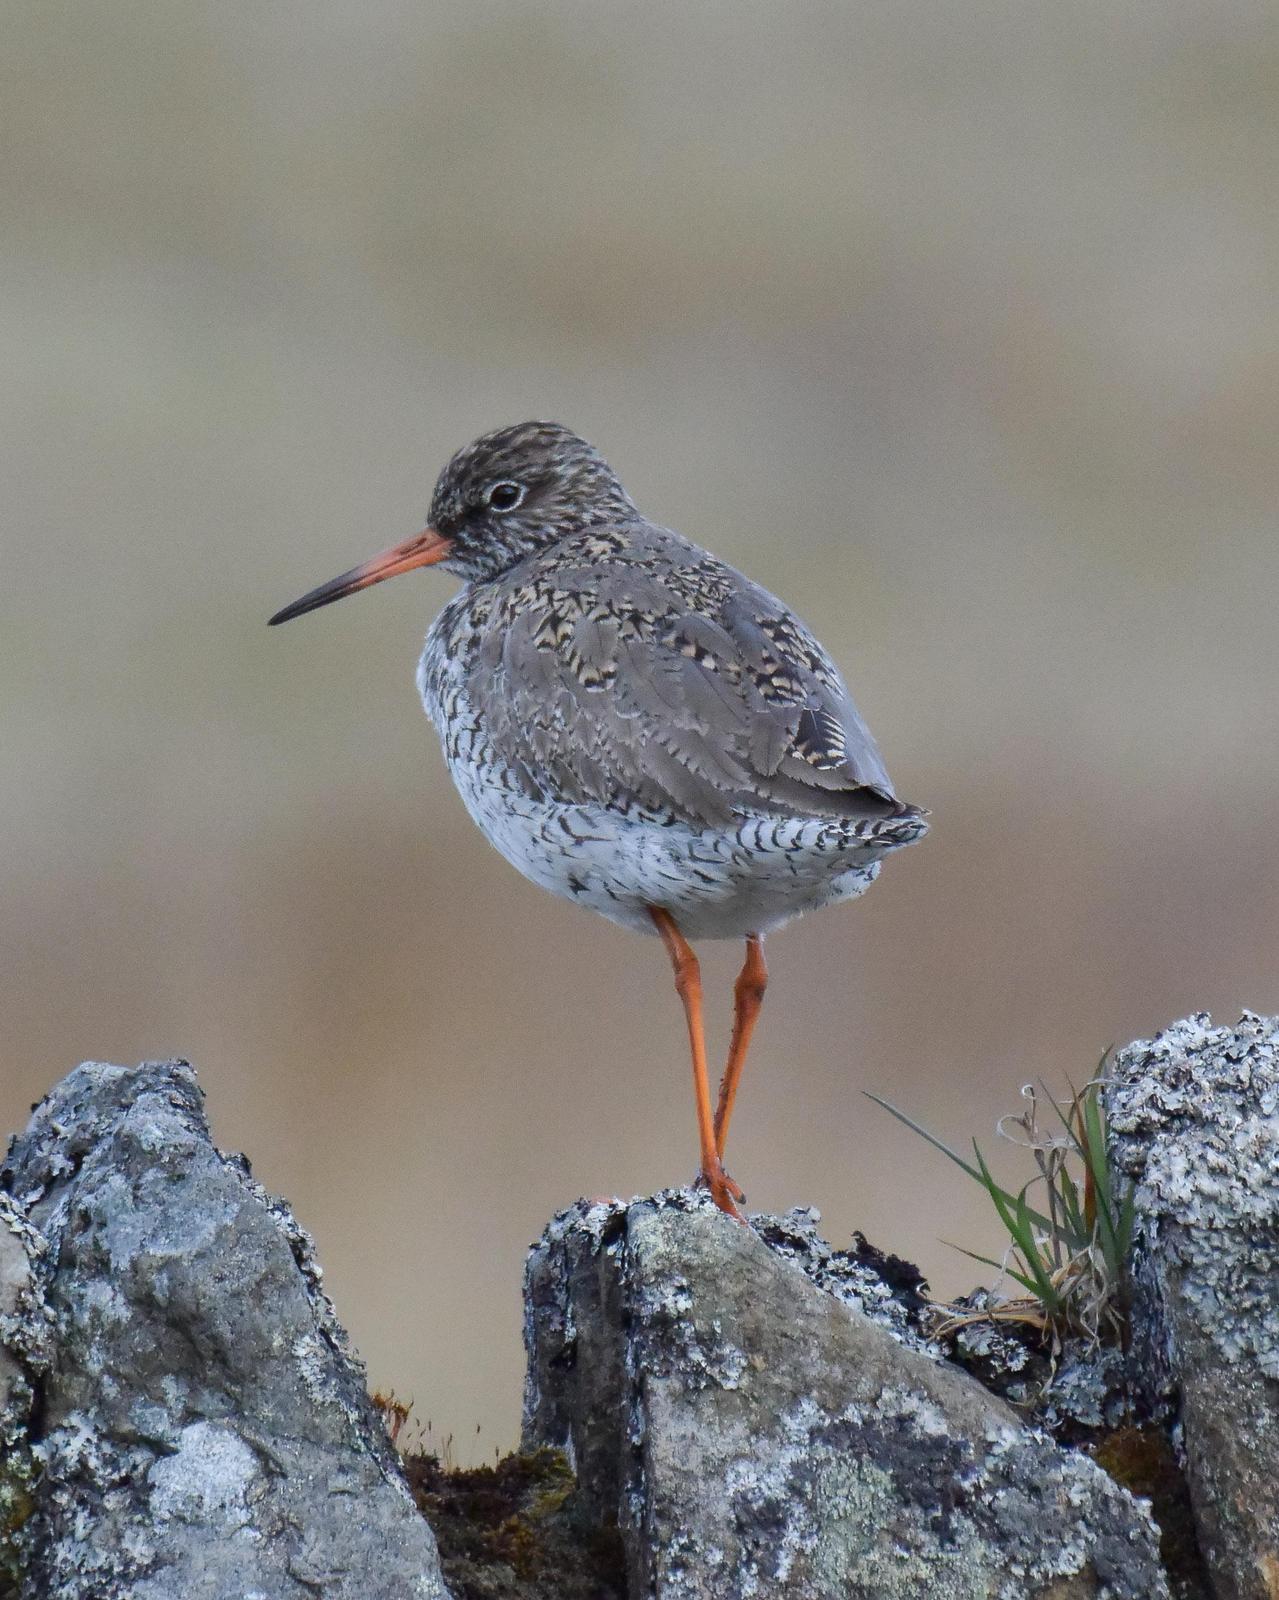 Common Redshank Photo by Emily Percival